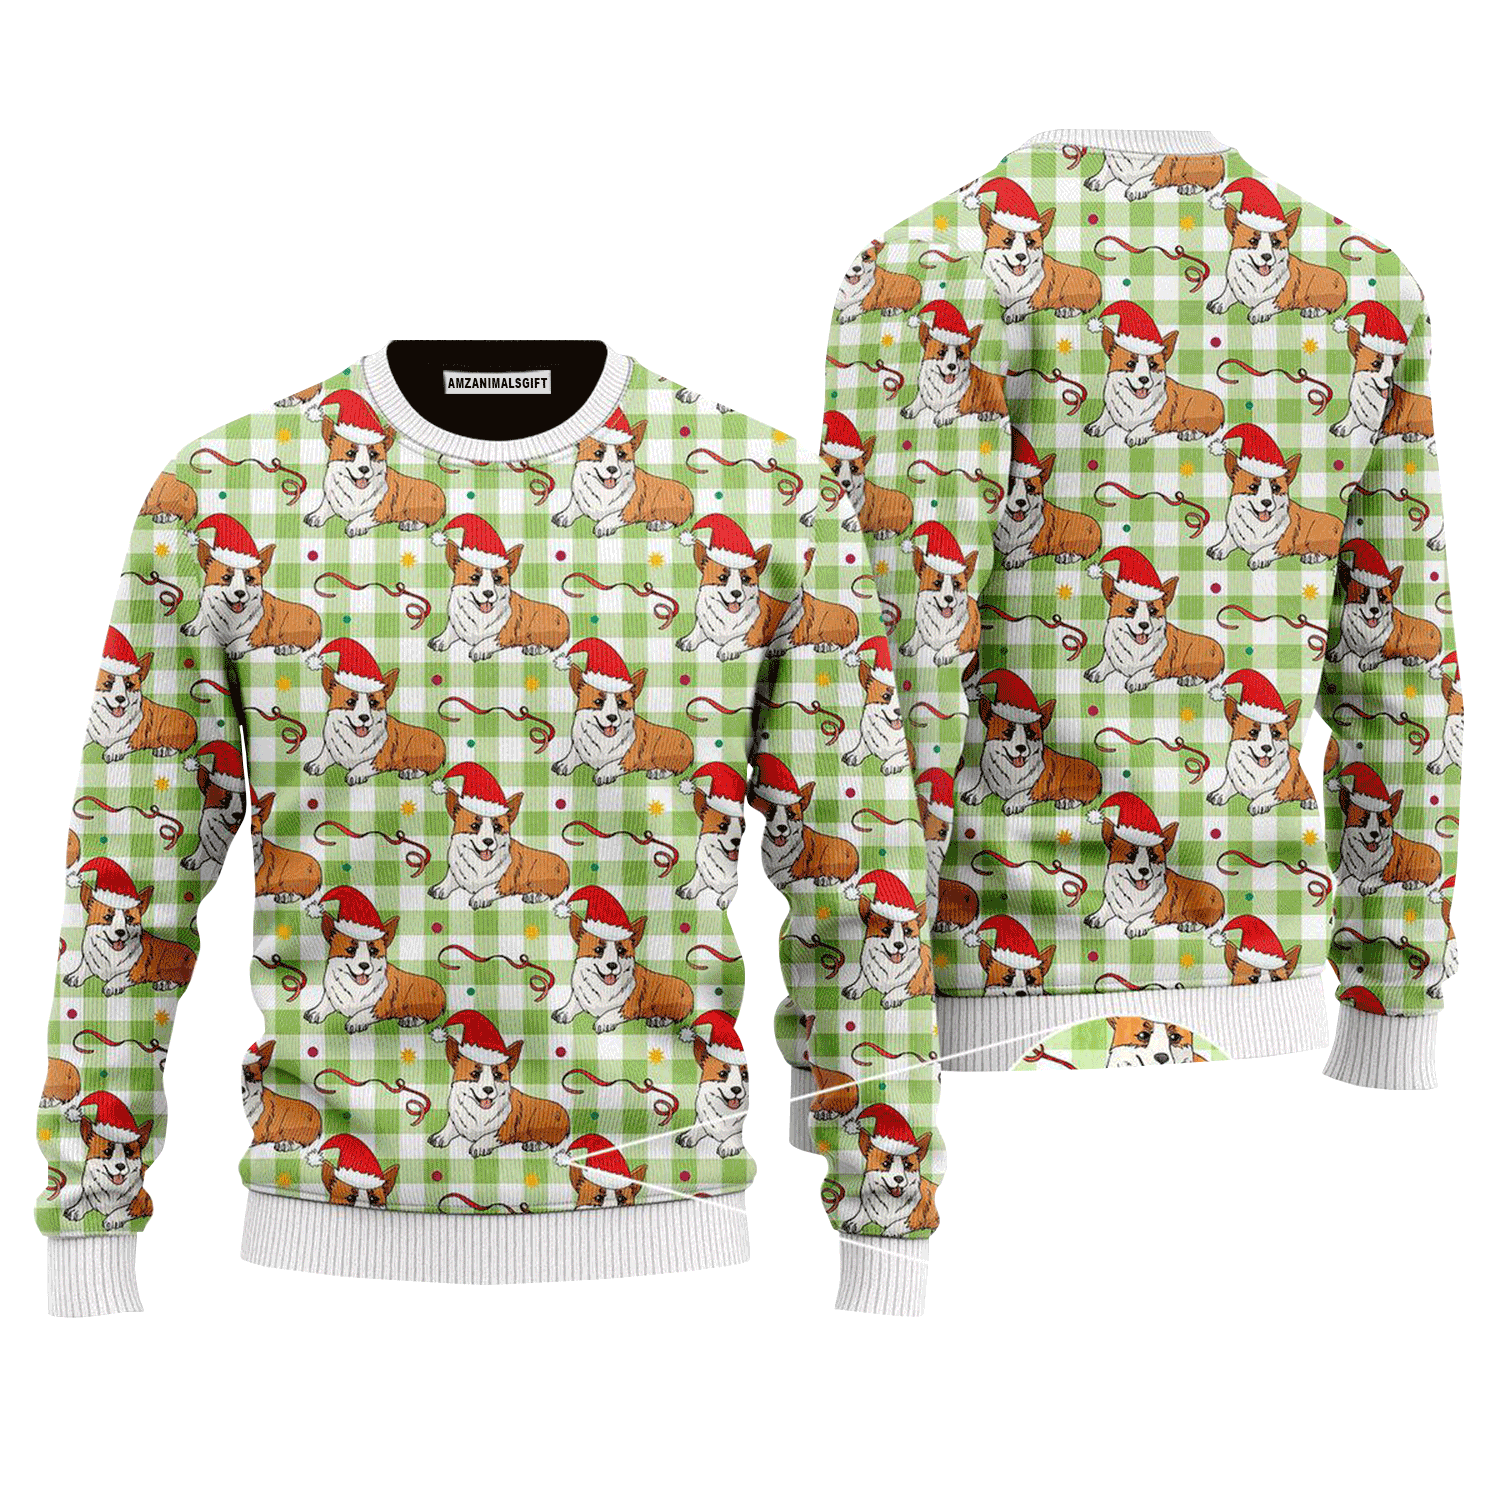 Corgi Sweater A Dult A Very Corgi , Ugly Sweater For Men & Women, Perfect Outfit For Christmas New Year Autumn Winter